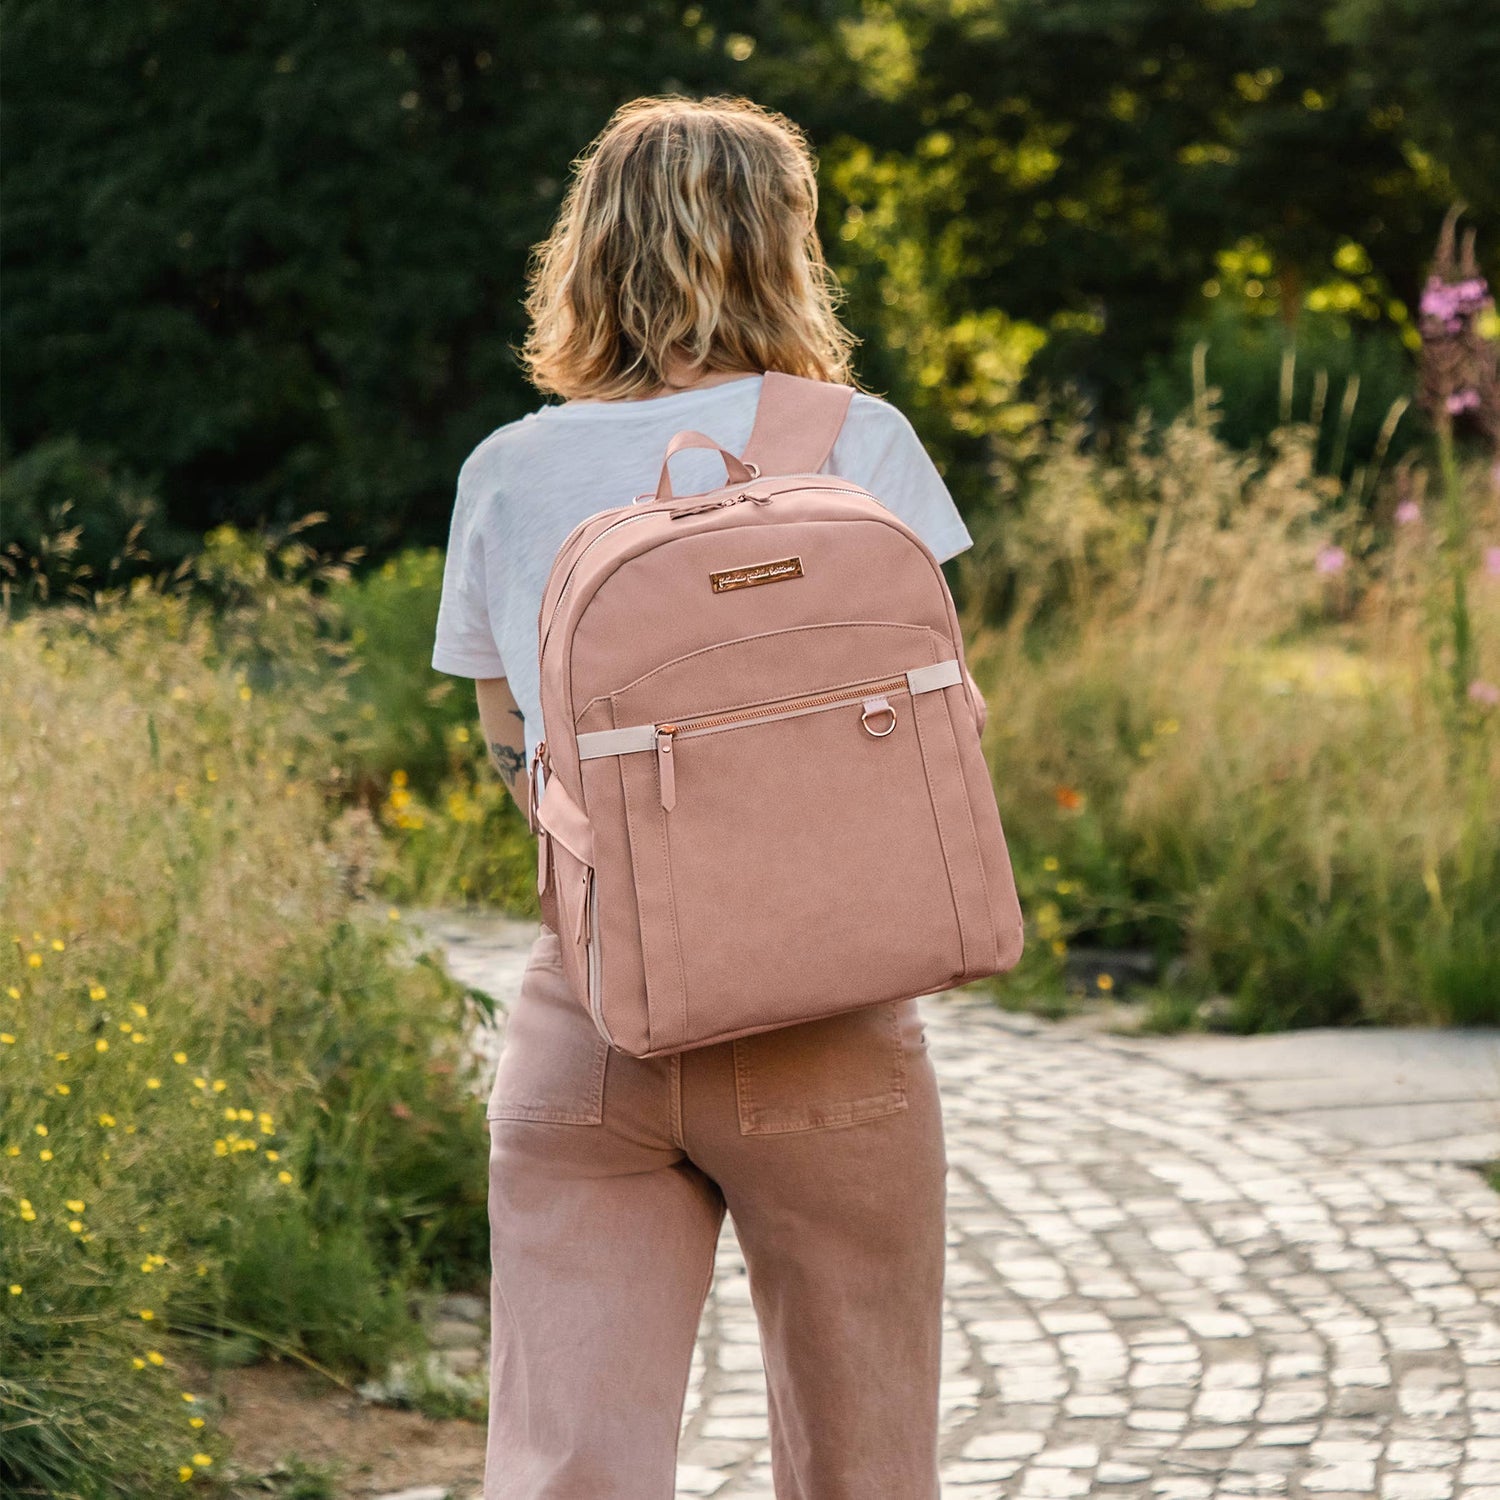 2-in-1 Provisions Backpack - Toffee Rose